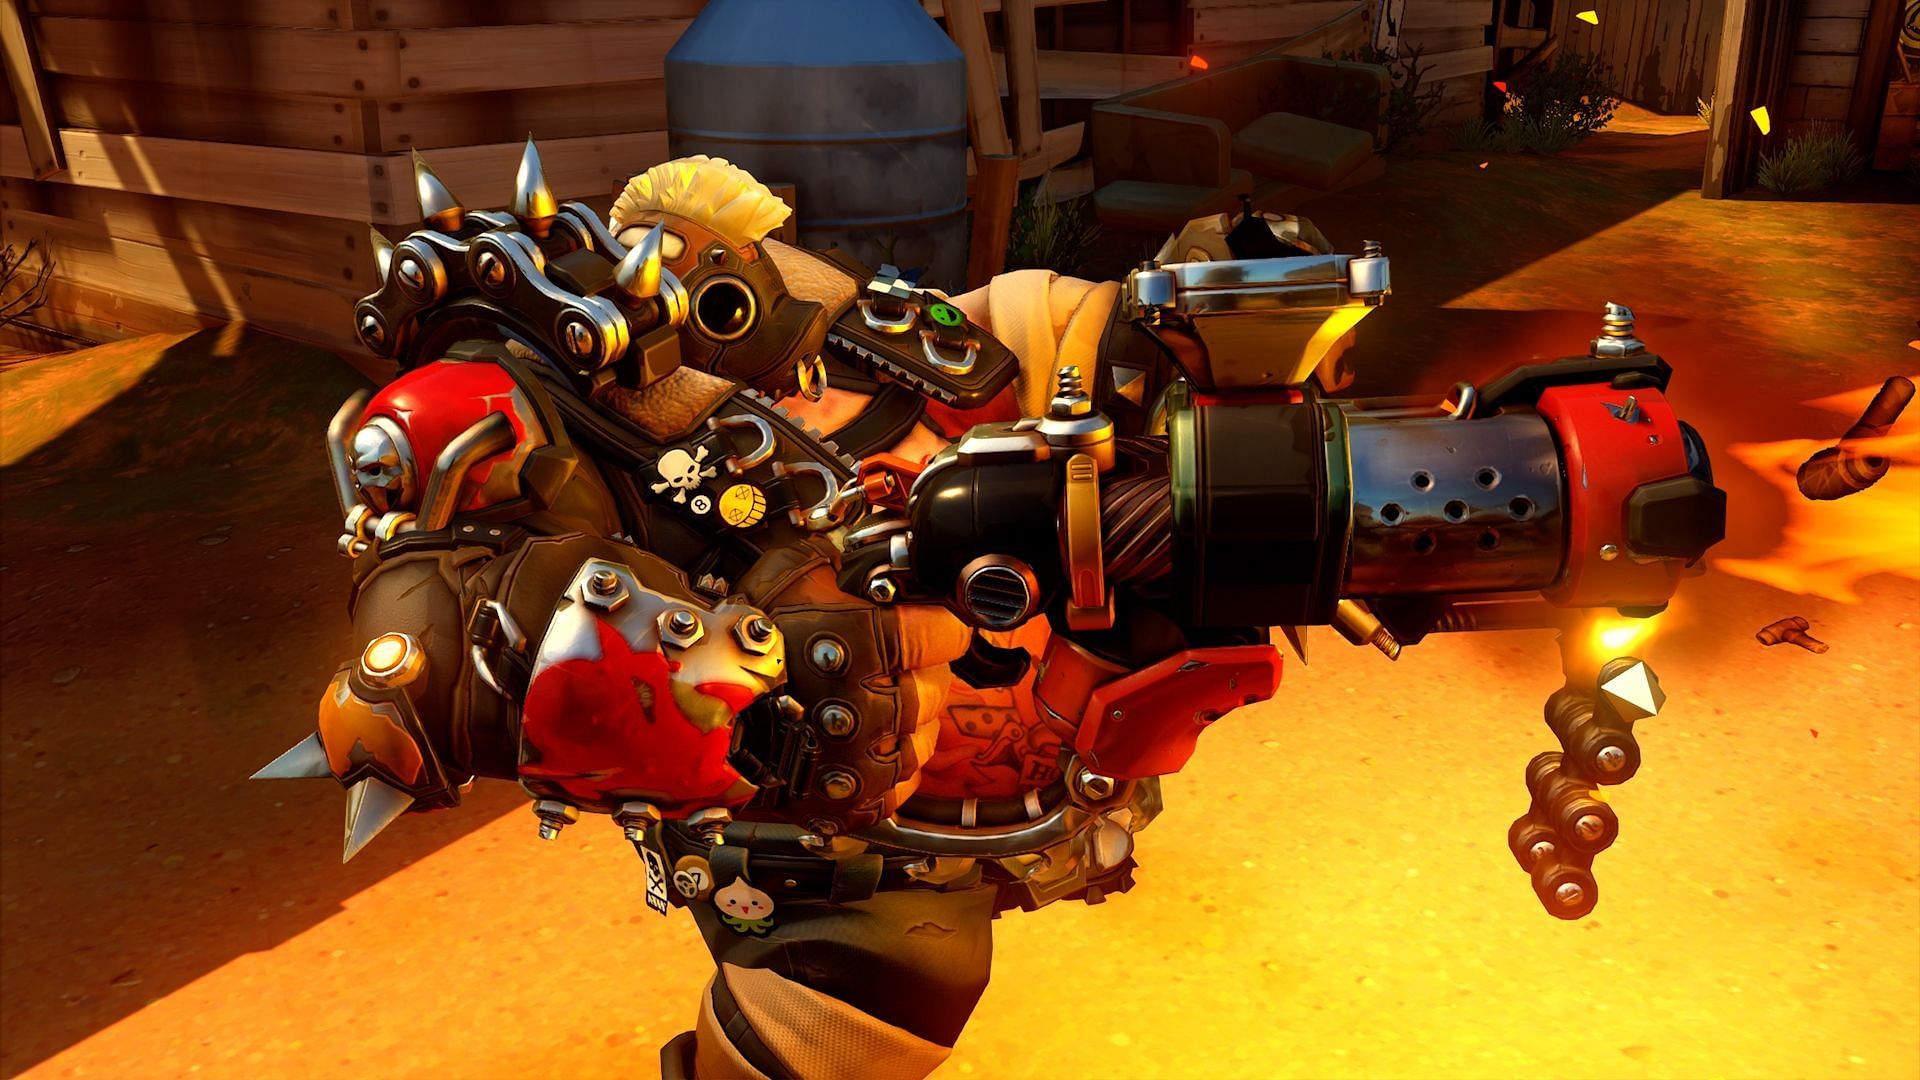 The hog is here as one of the best Tanks heroes for Clash in Overwatch 2 (